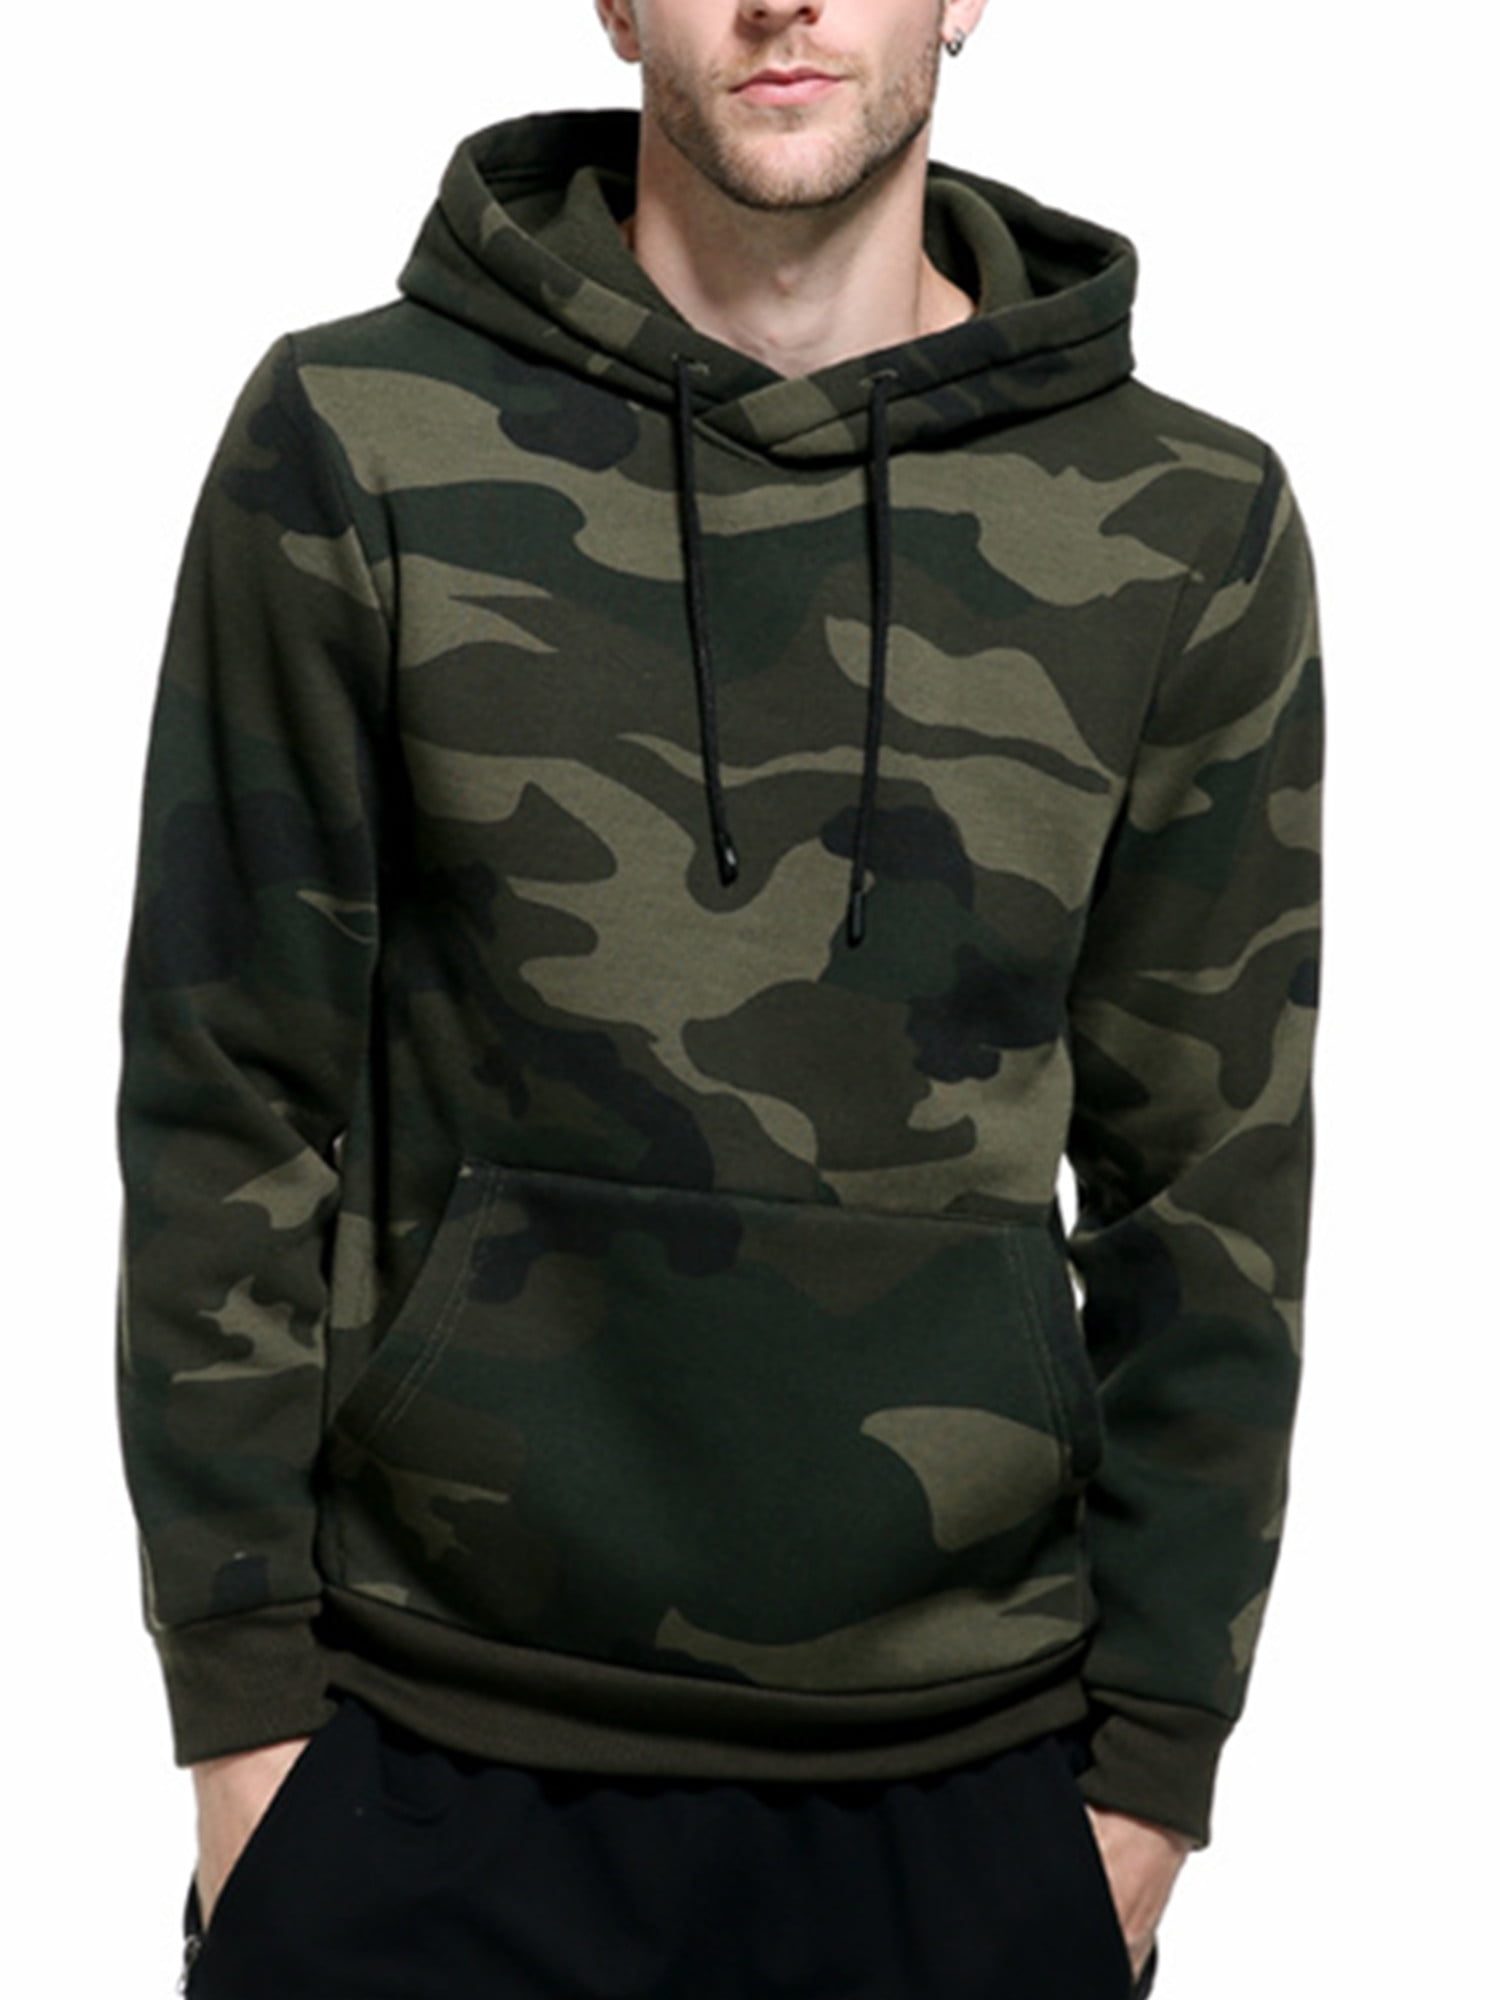 Mens Hoodies Zipper Slim Casual Long Sleeve Camo Patchwork Hooded Pullover Camo Hooded Sweatshirts in Sizes M-3XL